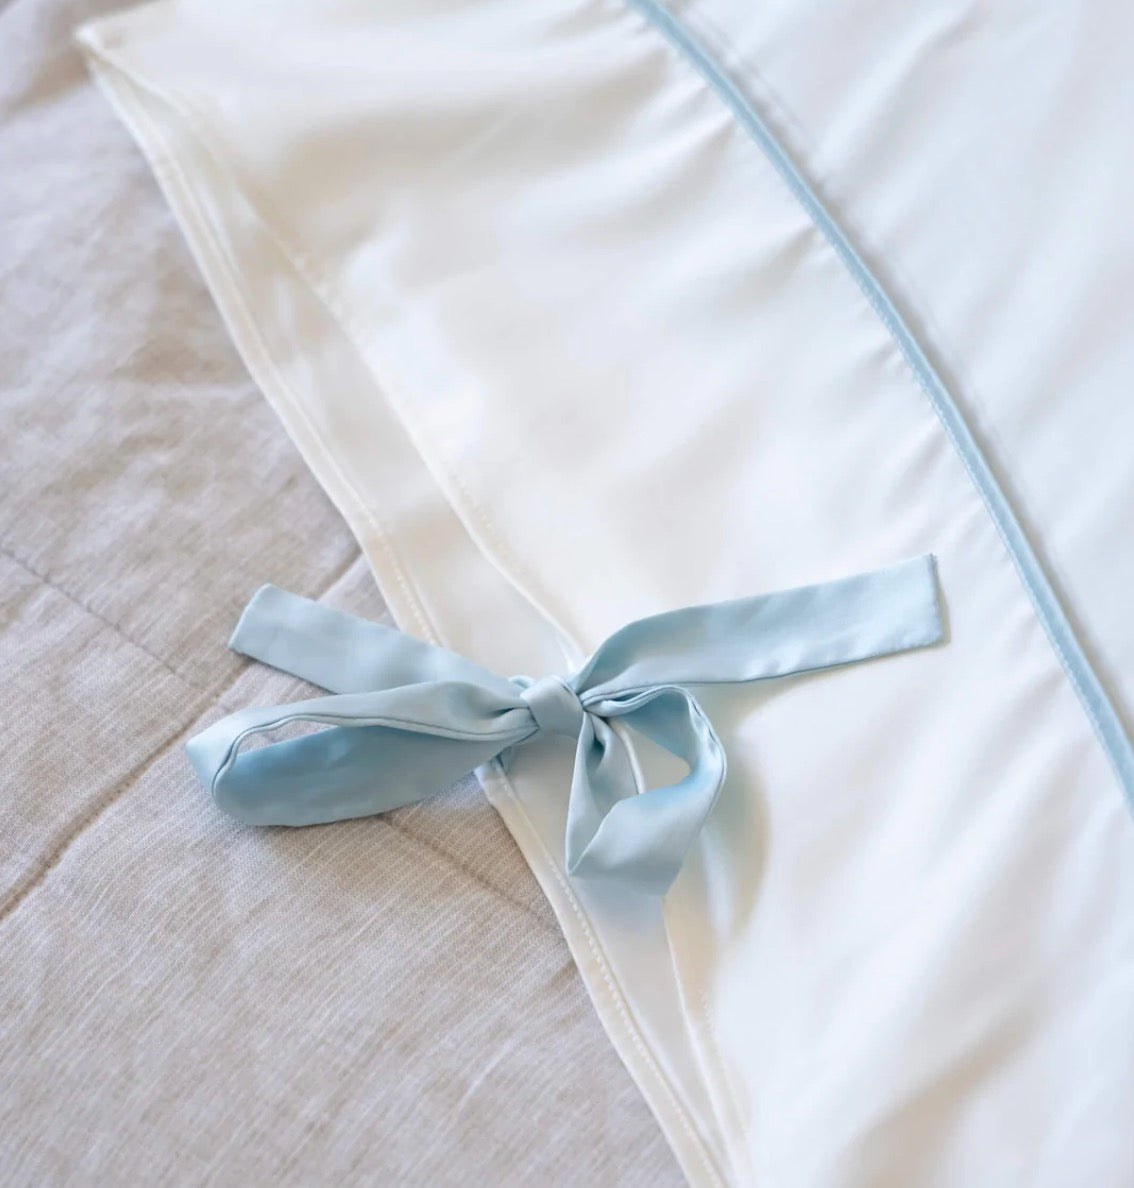 Mersea - Sleep Mask and Pillowcase Set-Cream/Light blue accent | Fig Linens and Home